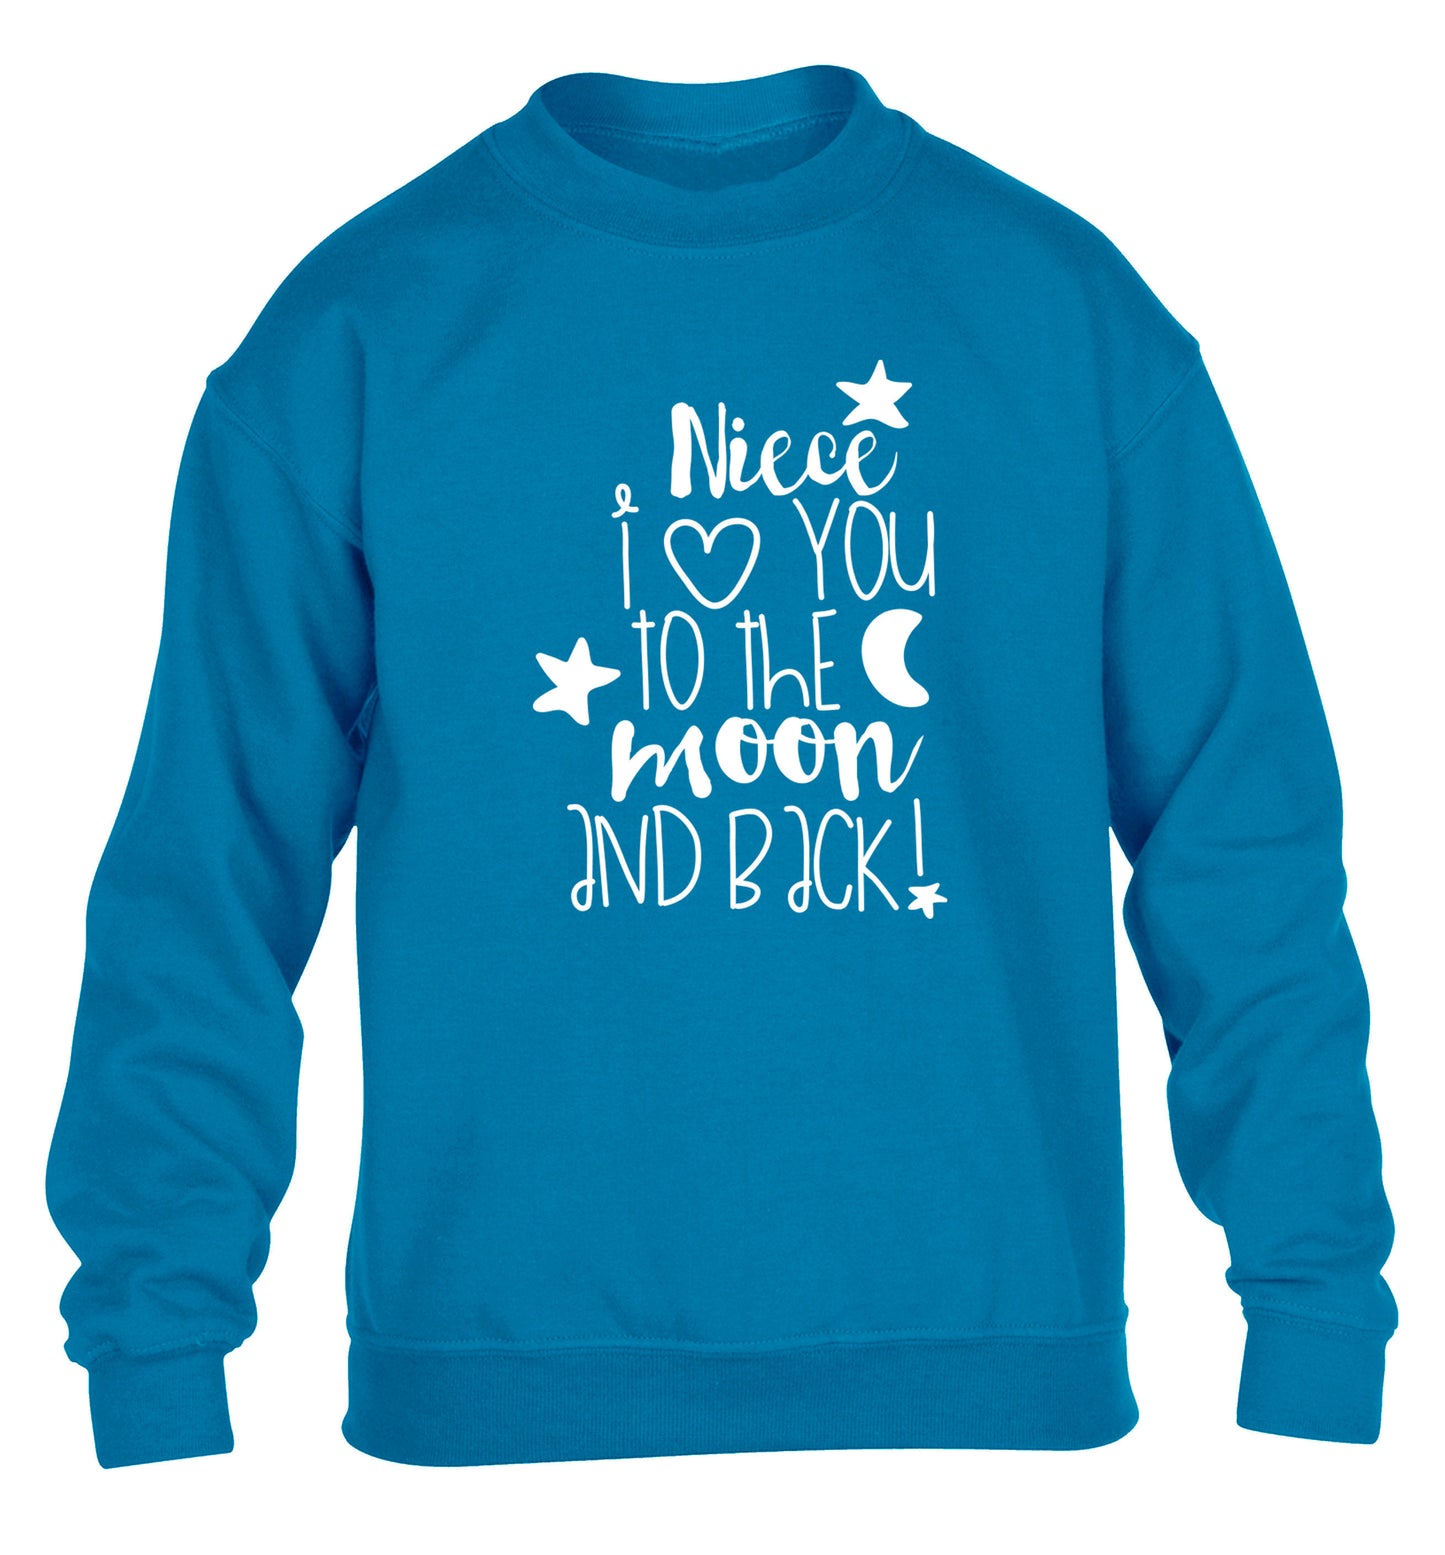 Niece I love you to the moon and back children's blue  sweater 12-14 Years